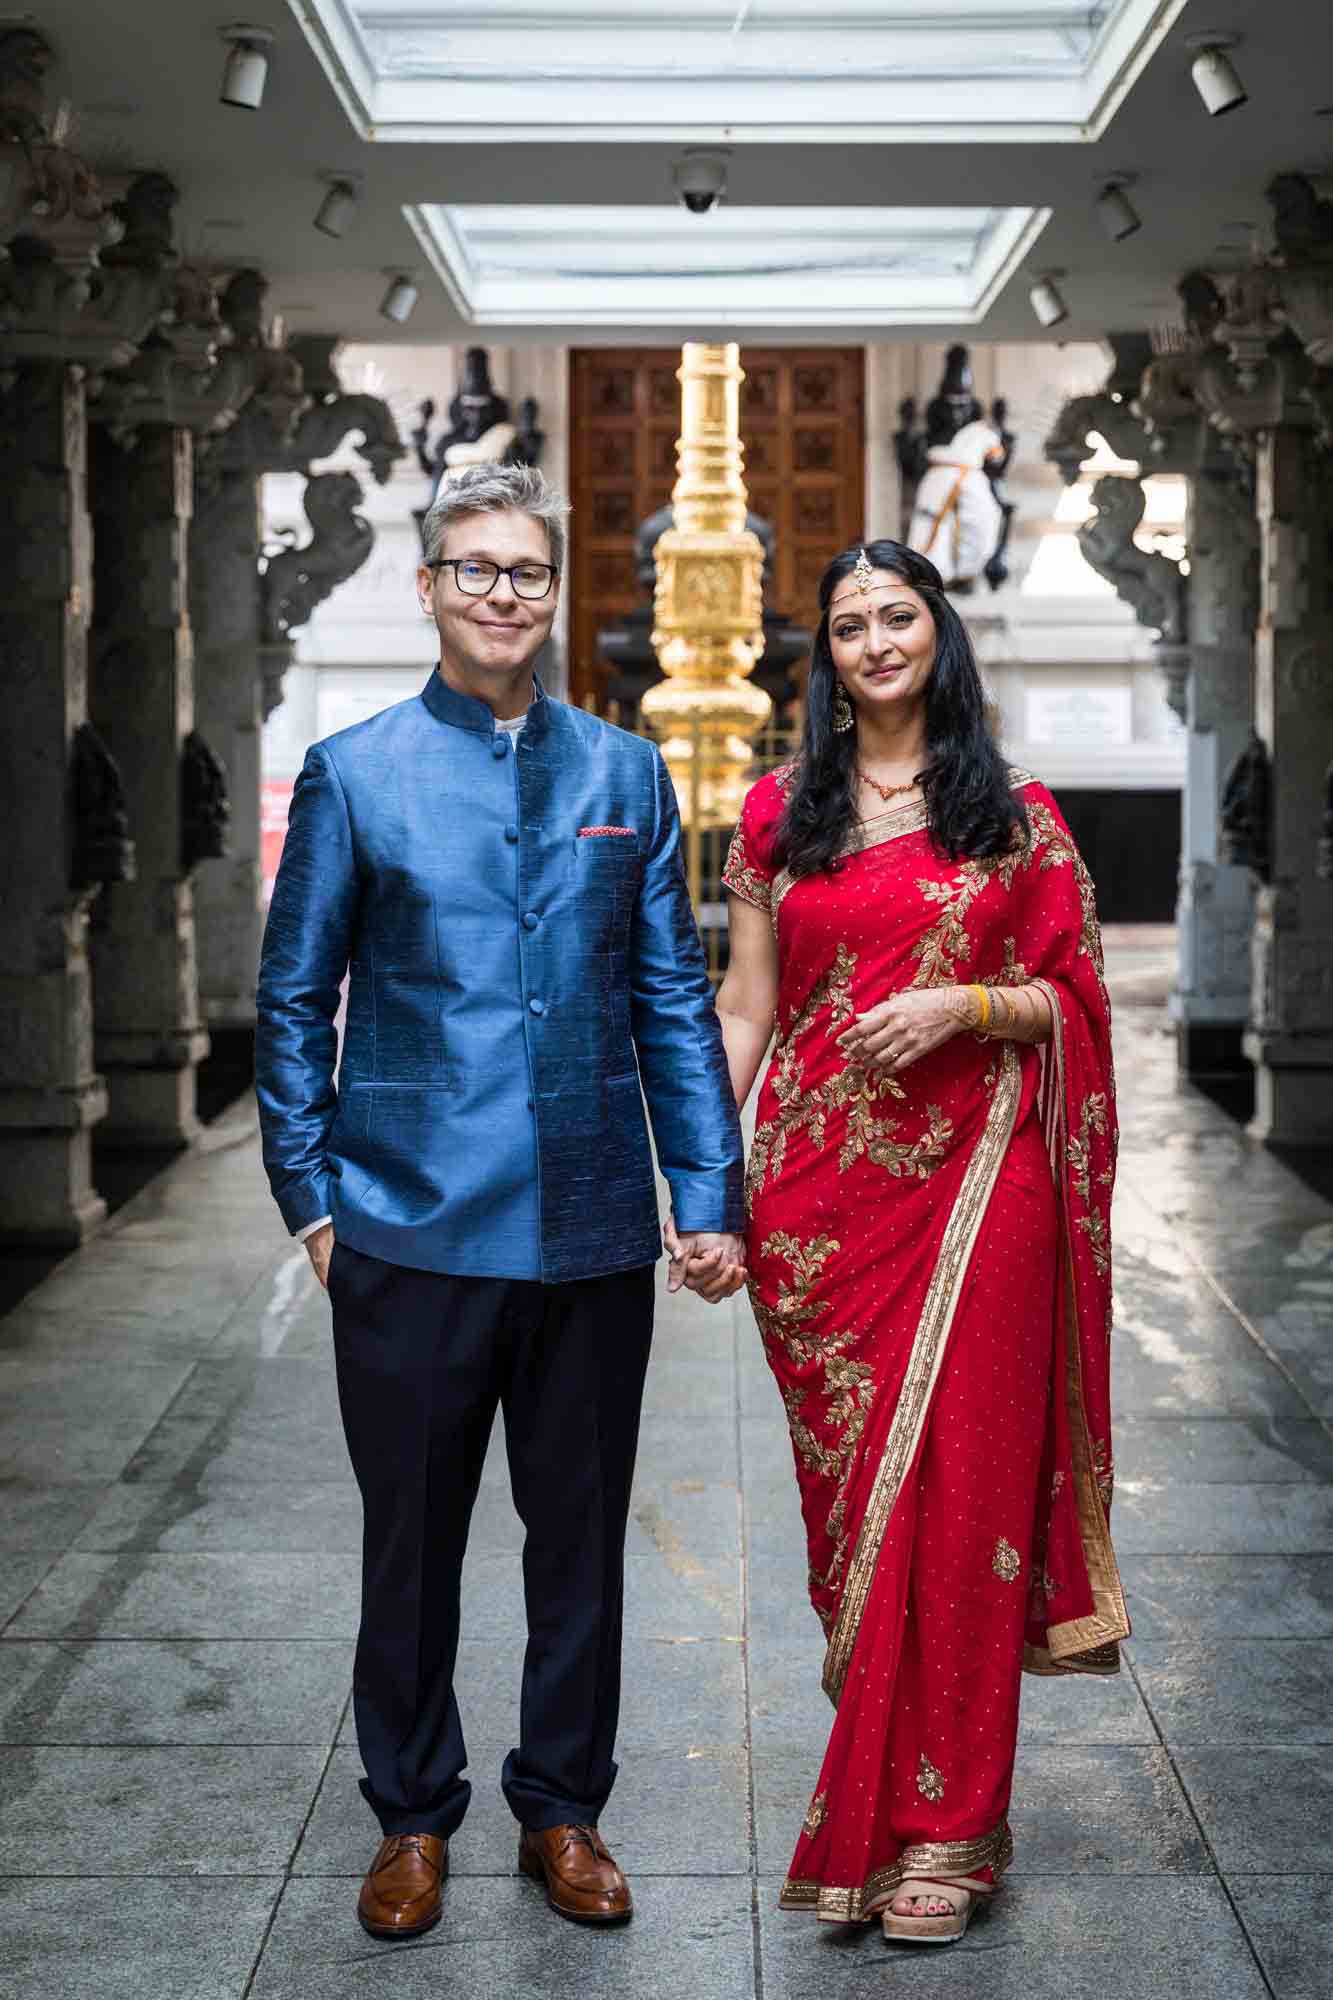 Ganesha Temple wedding photos of bride and groom holding hands in middle of main walkway